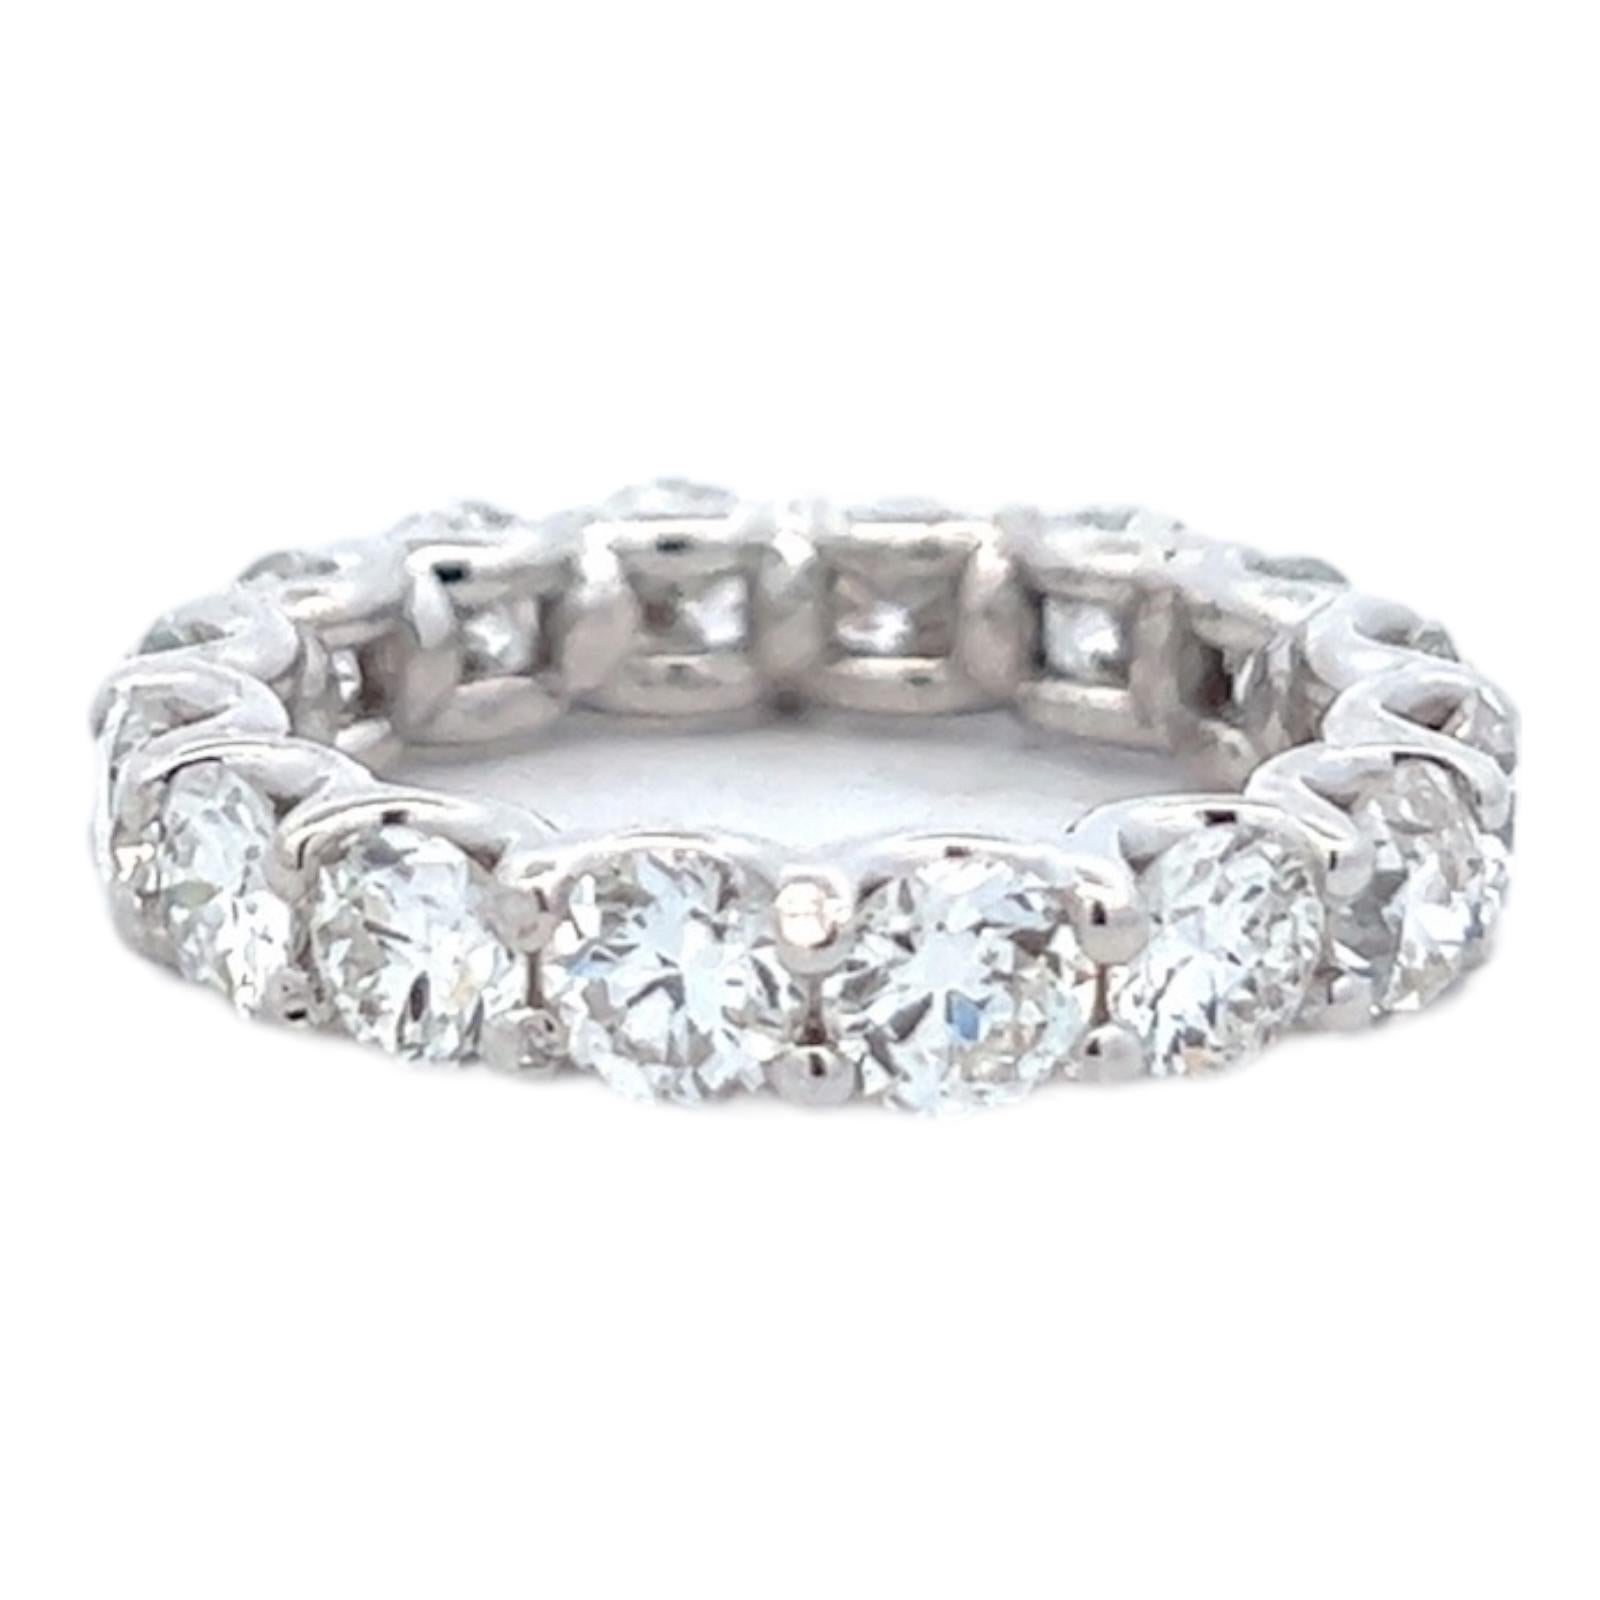 Beautiful diamond eternity wedding band handcrafted in 18 karat white gold. The ring features 16 round brilliant cut diamonds weighing 4.00 CTW set in a 'U' prong mounting. The diamonds are graded G-H color and VS clarity. The ring measures 4mm in